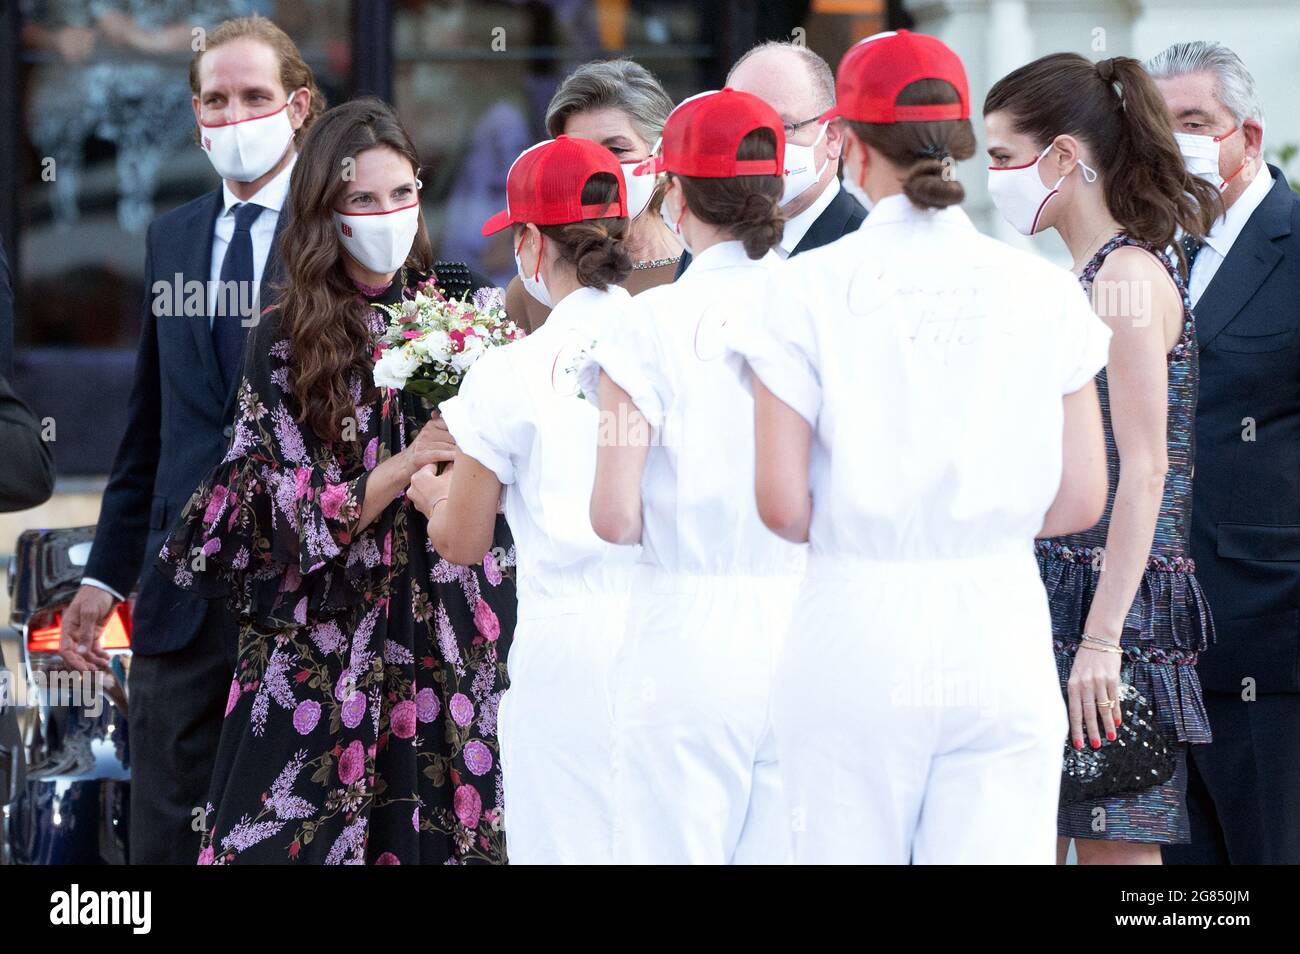 Monaco. 16th July, 2021. FRANCE TABLOIDS OUT - Andrea Casiraghi and his wife Tatiana Santo Domingo attend the Red Cross Summer Concert on July 16, 2021 in Monte-Carlo, Monaco. Photo by David Niviere/ABACAPRESS.COM Credit: Abaca Press/Alamy Live News Stock Photo